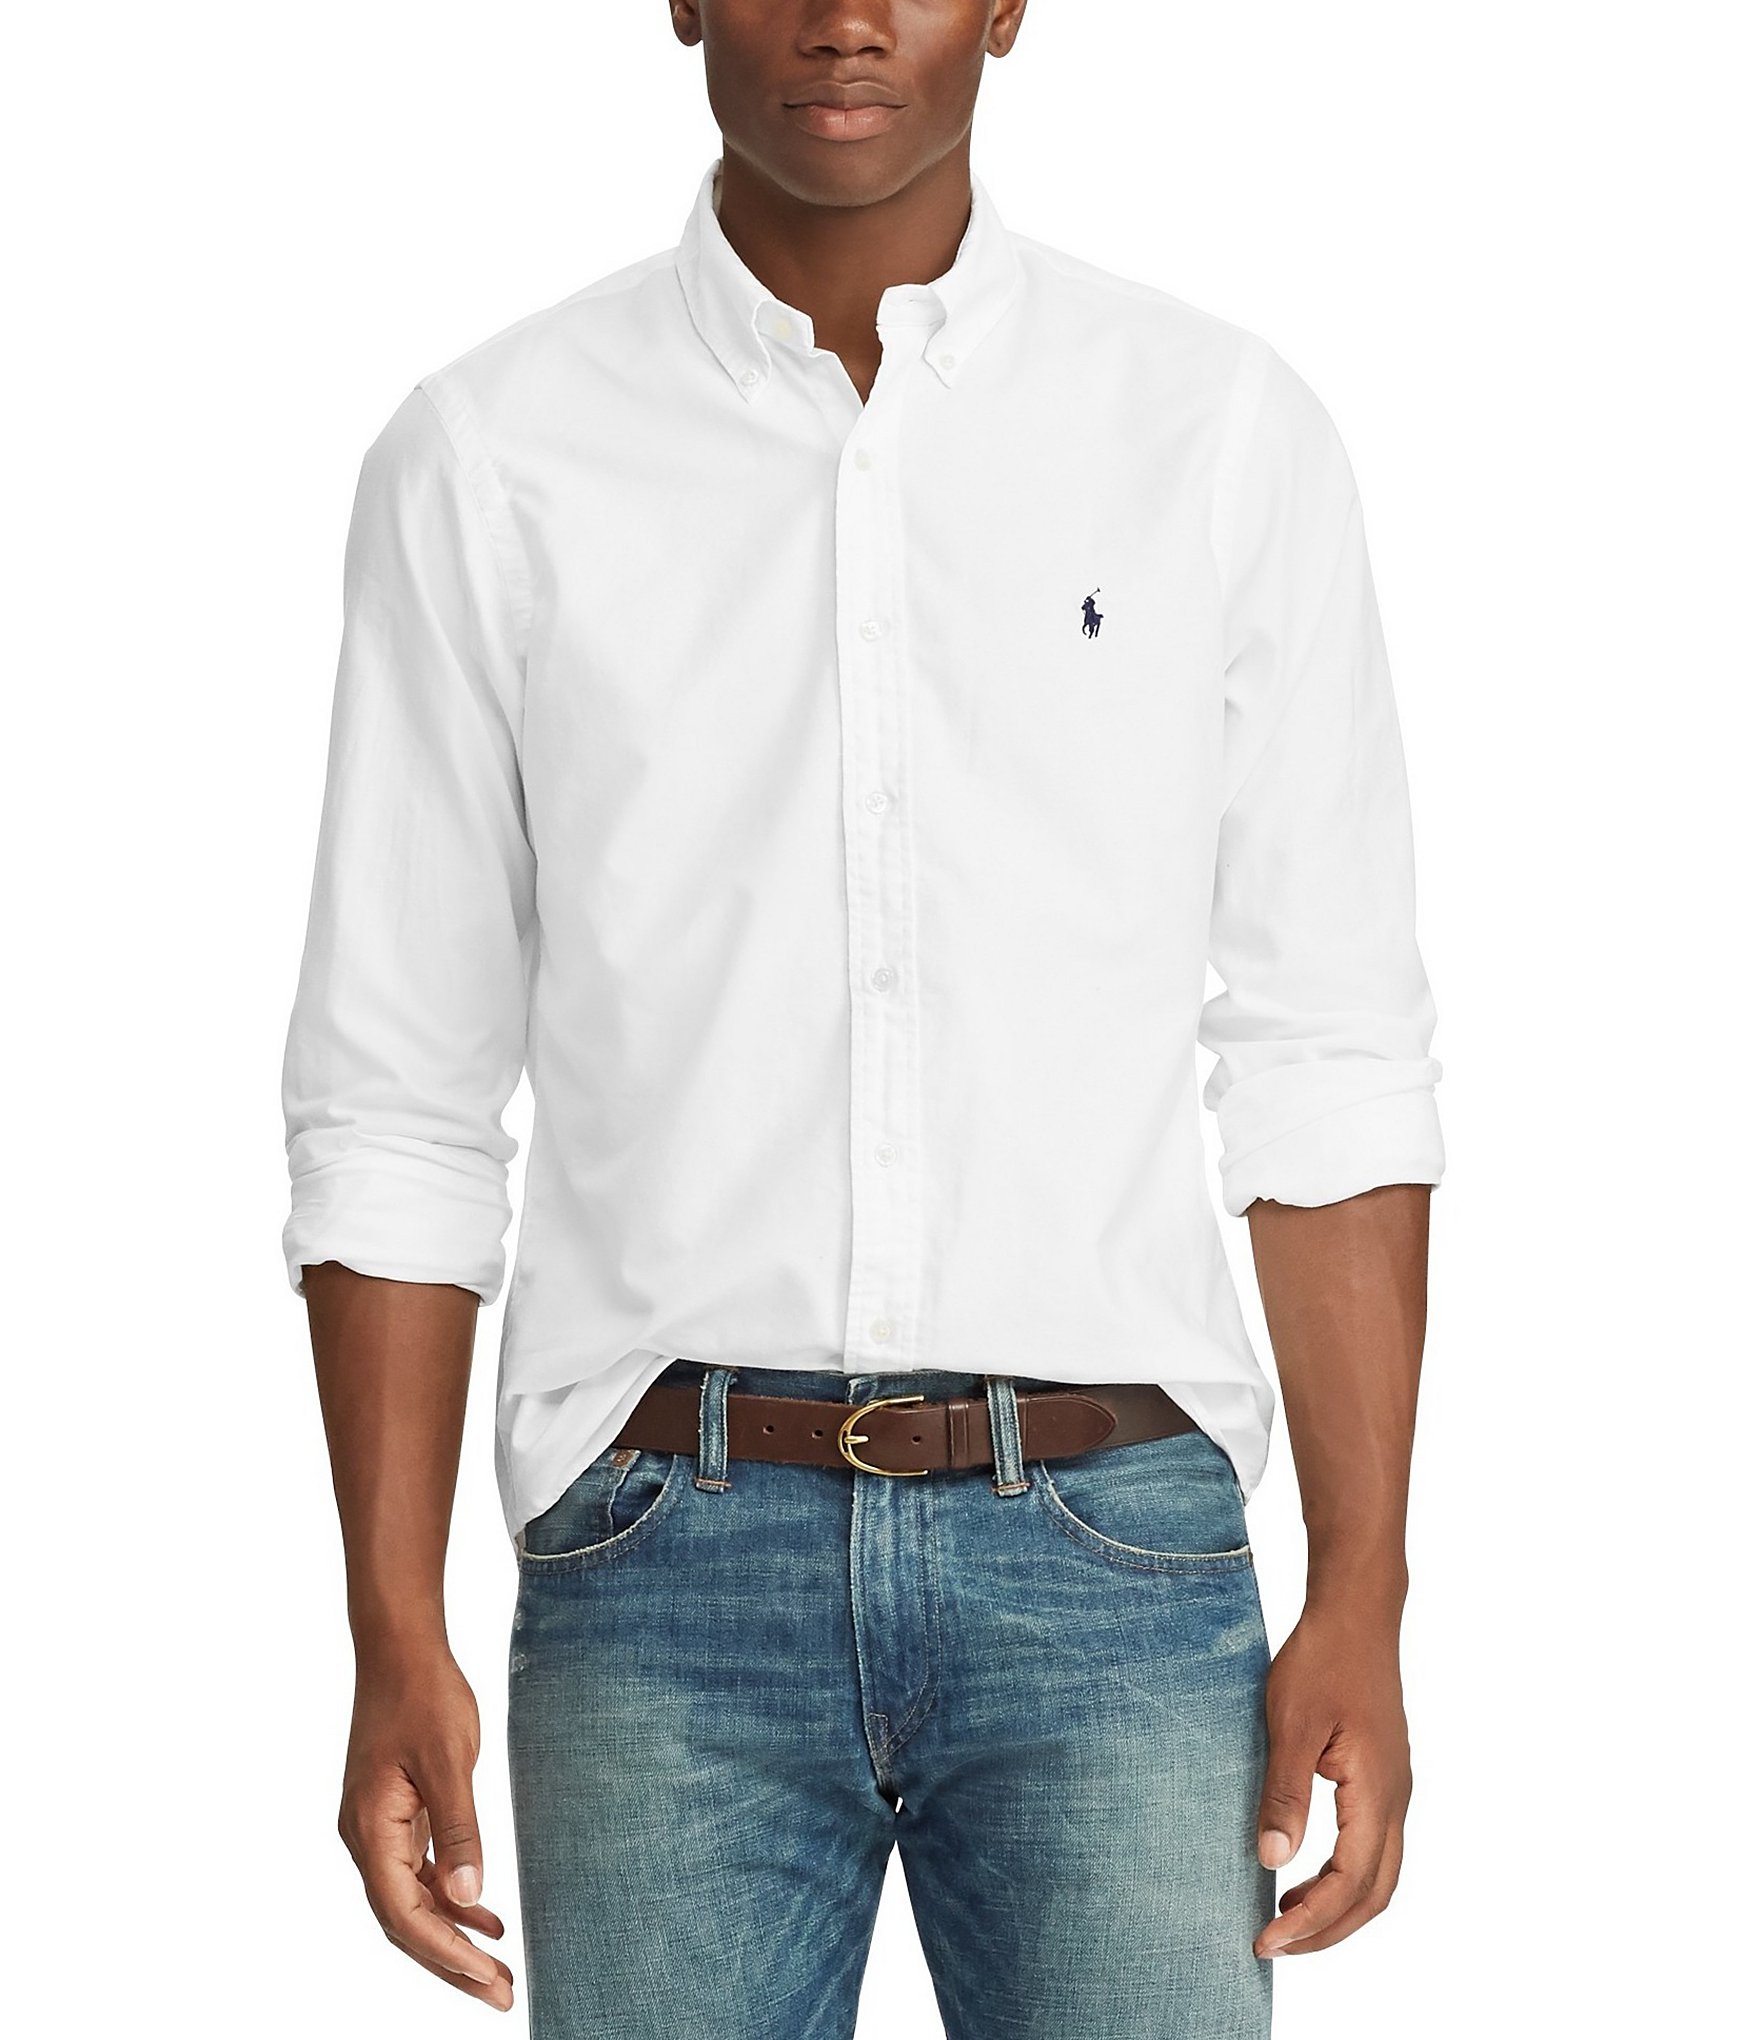 in the meantime laundry Scorch Polo Ralph Lauren Men's Shirts | Dillard's